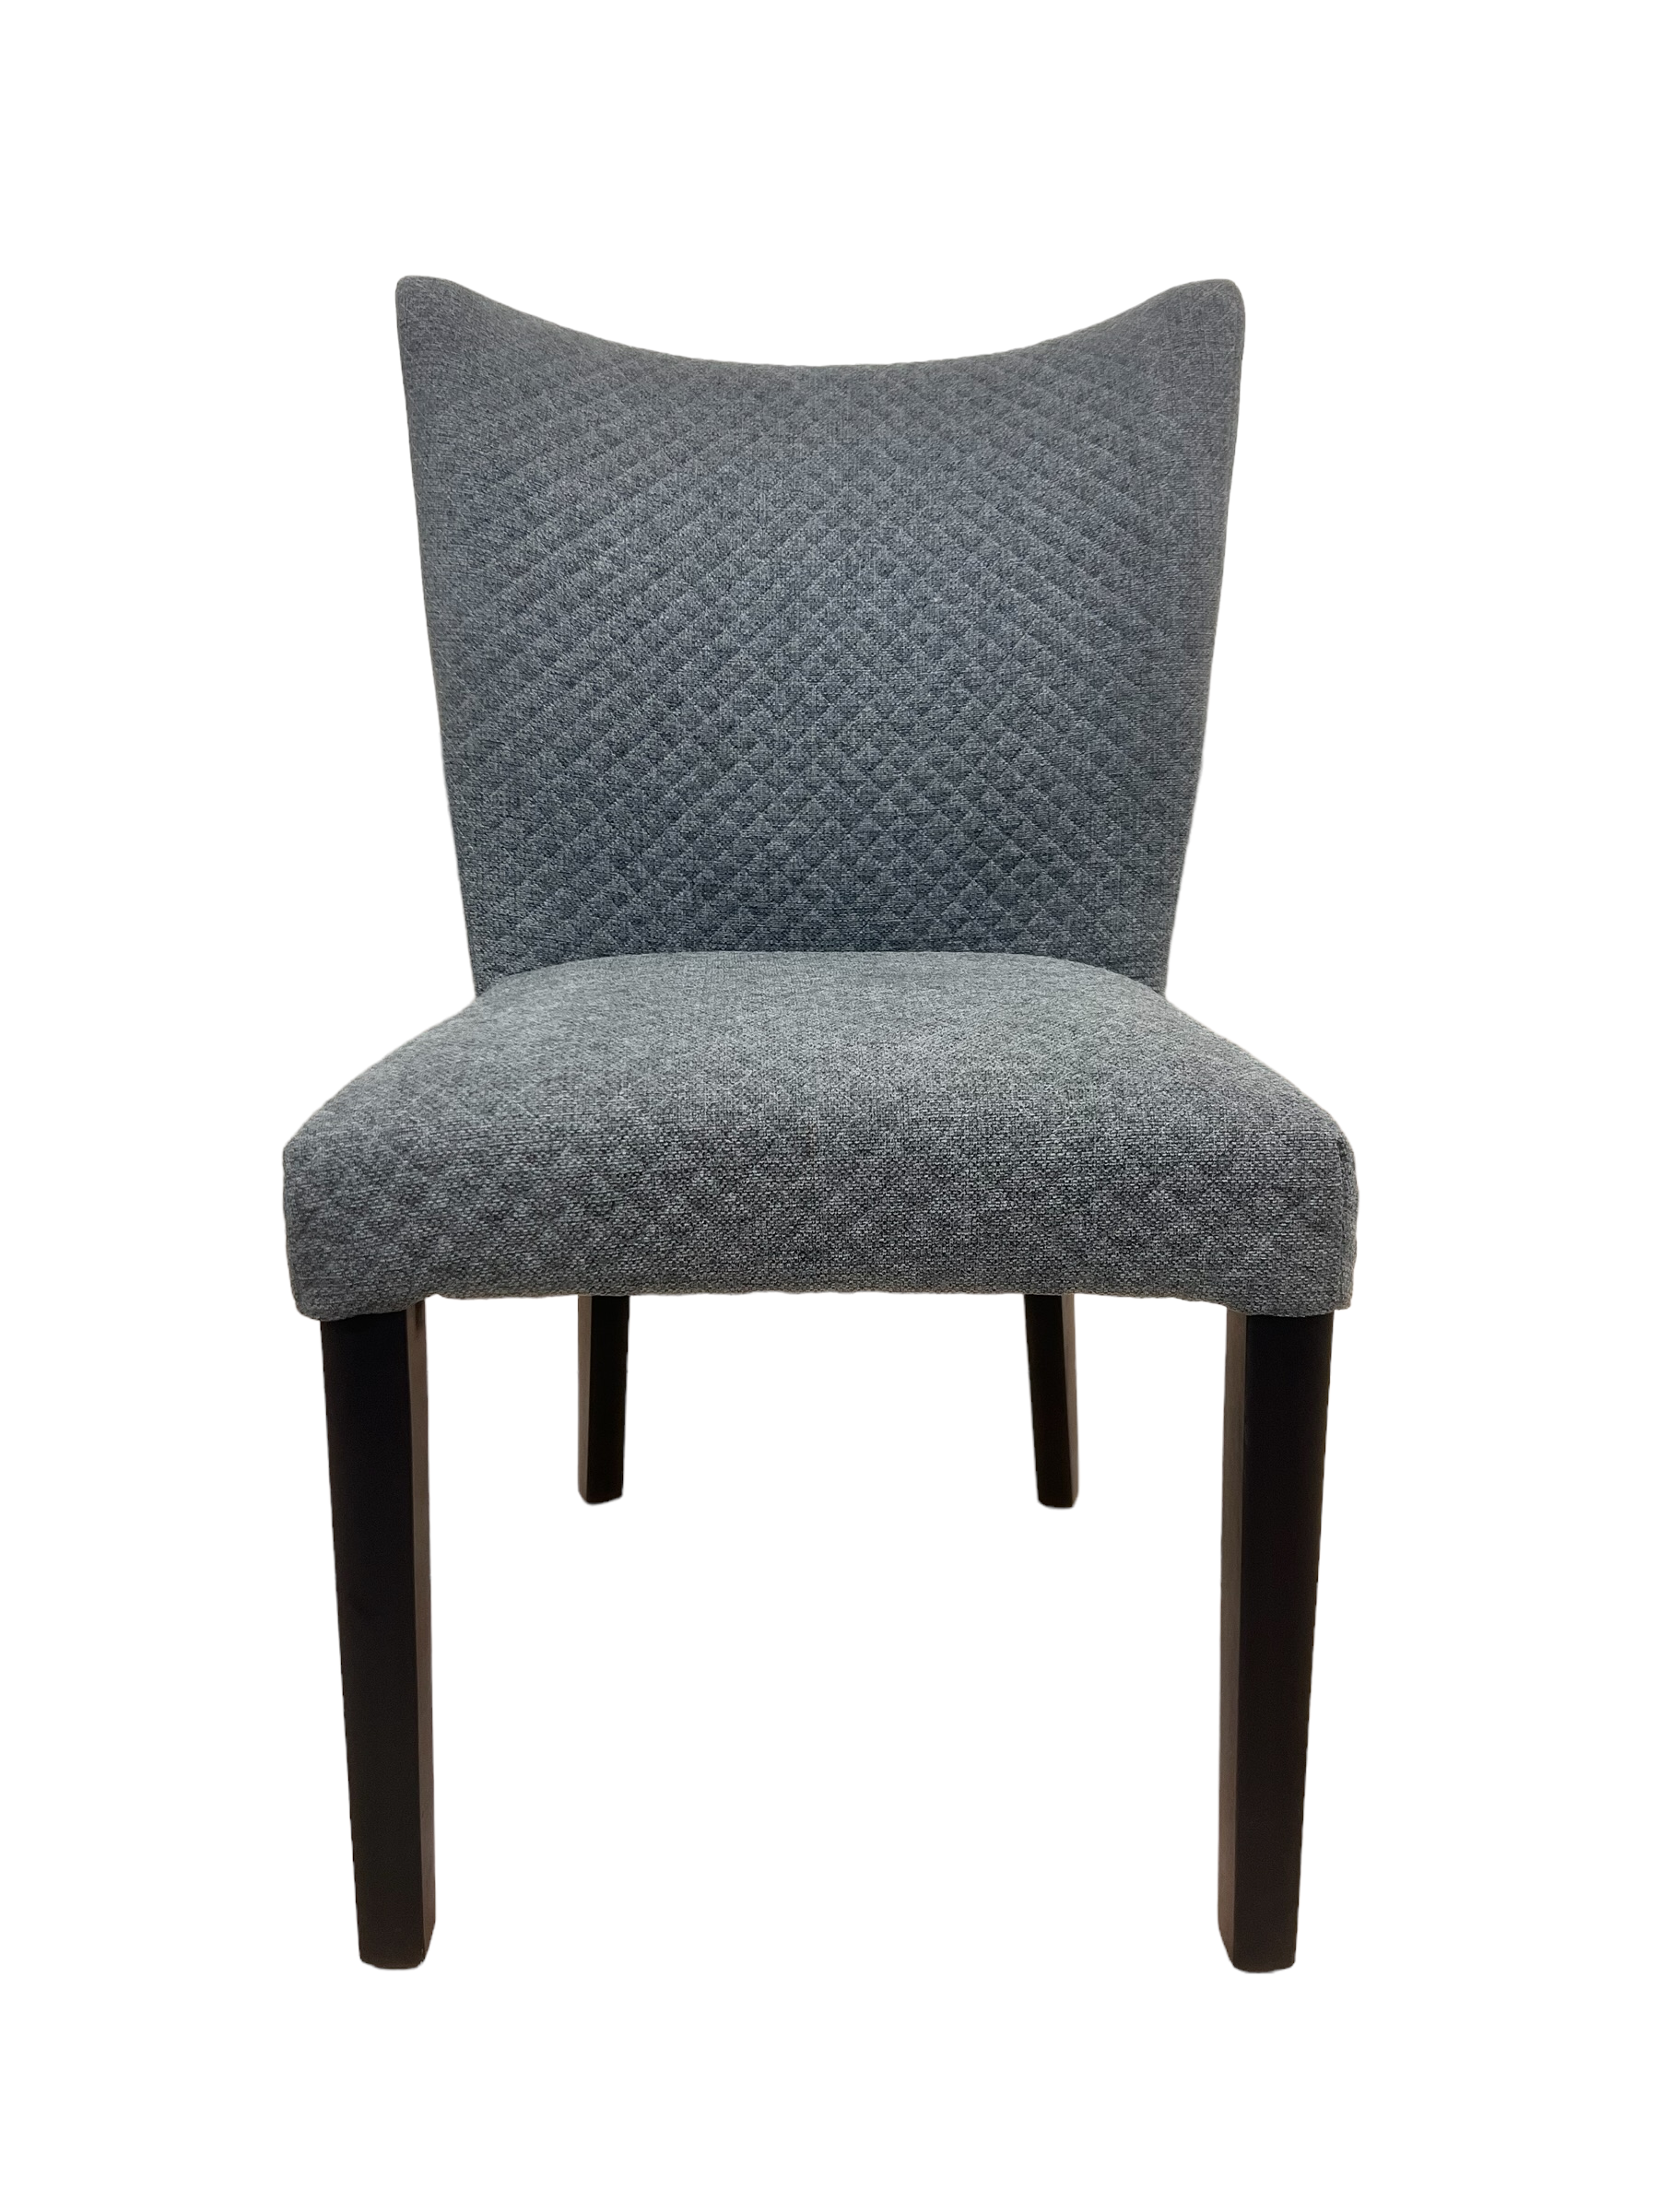 Tobago Upholster Chair In Charcoal With Black Leg